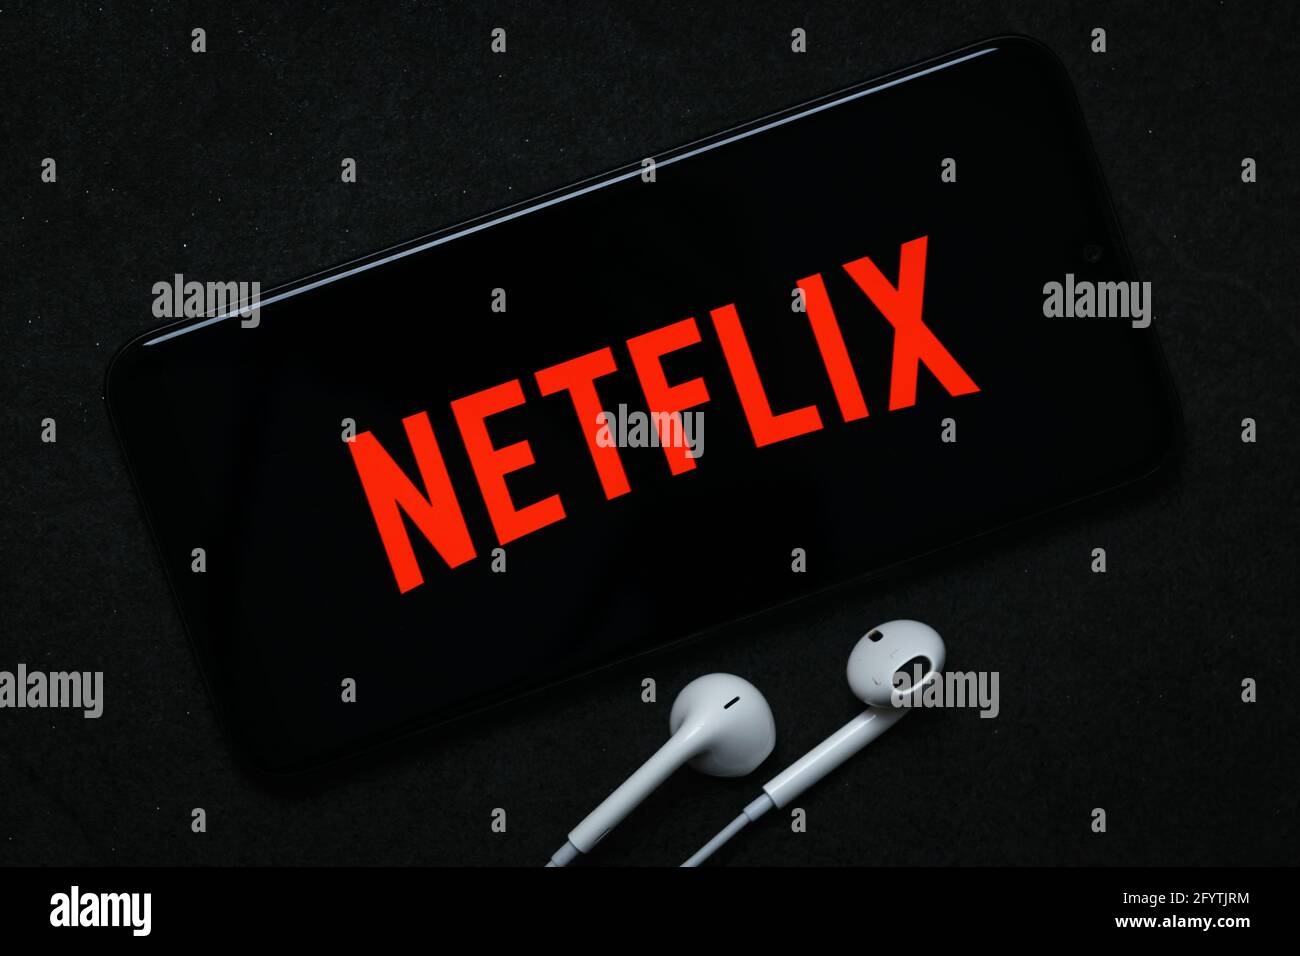 Krakow, Poland - October 07, 2020: Netflix sign on the smartphone screen. Netflix is a famous provider of Internet streaming  service for watching vid Stock Photo